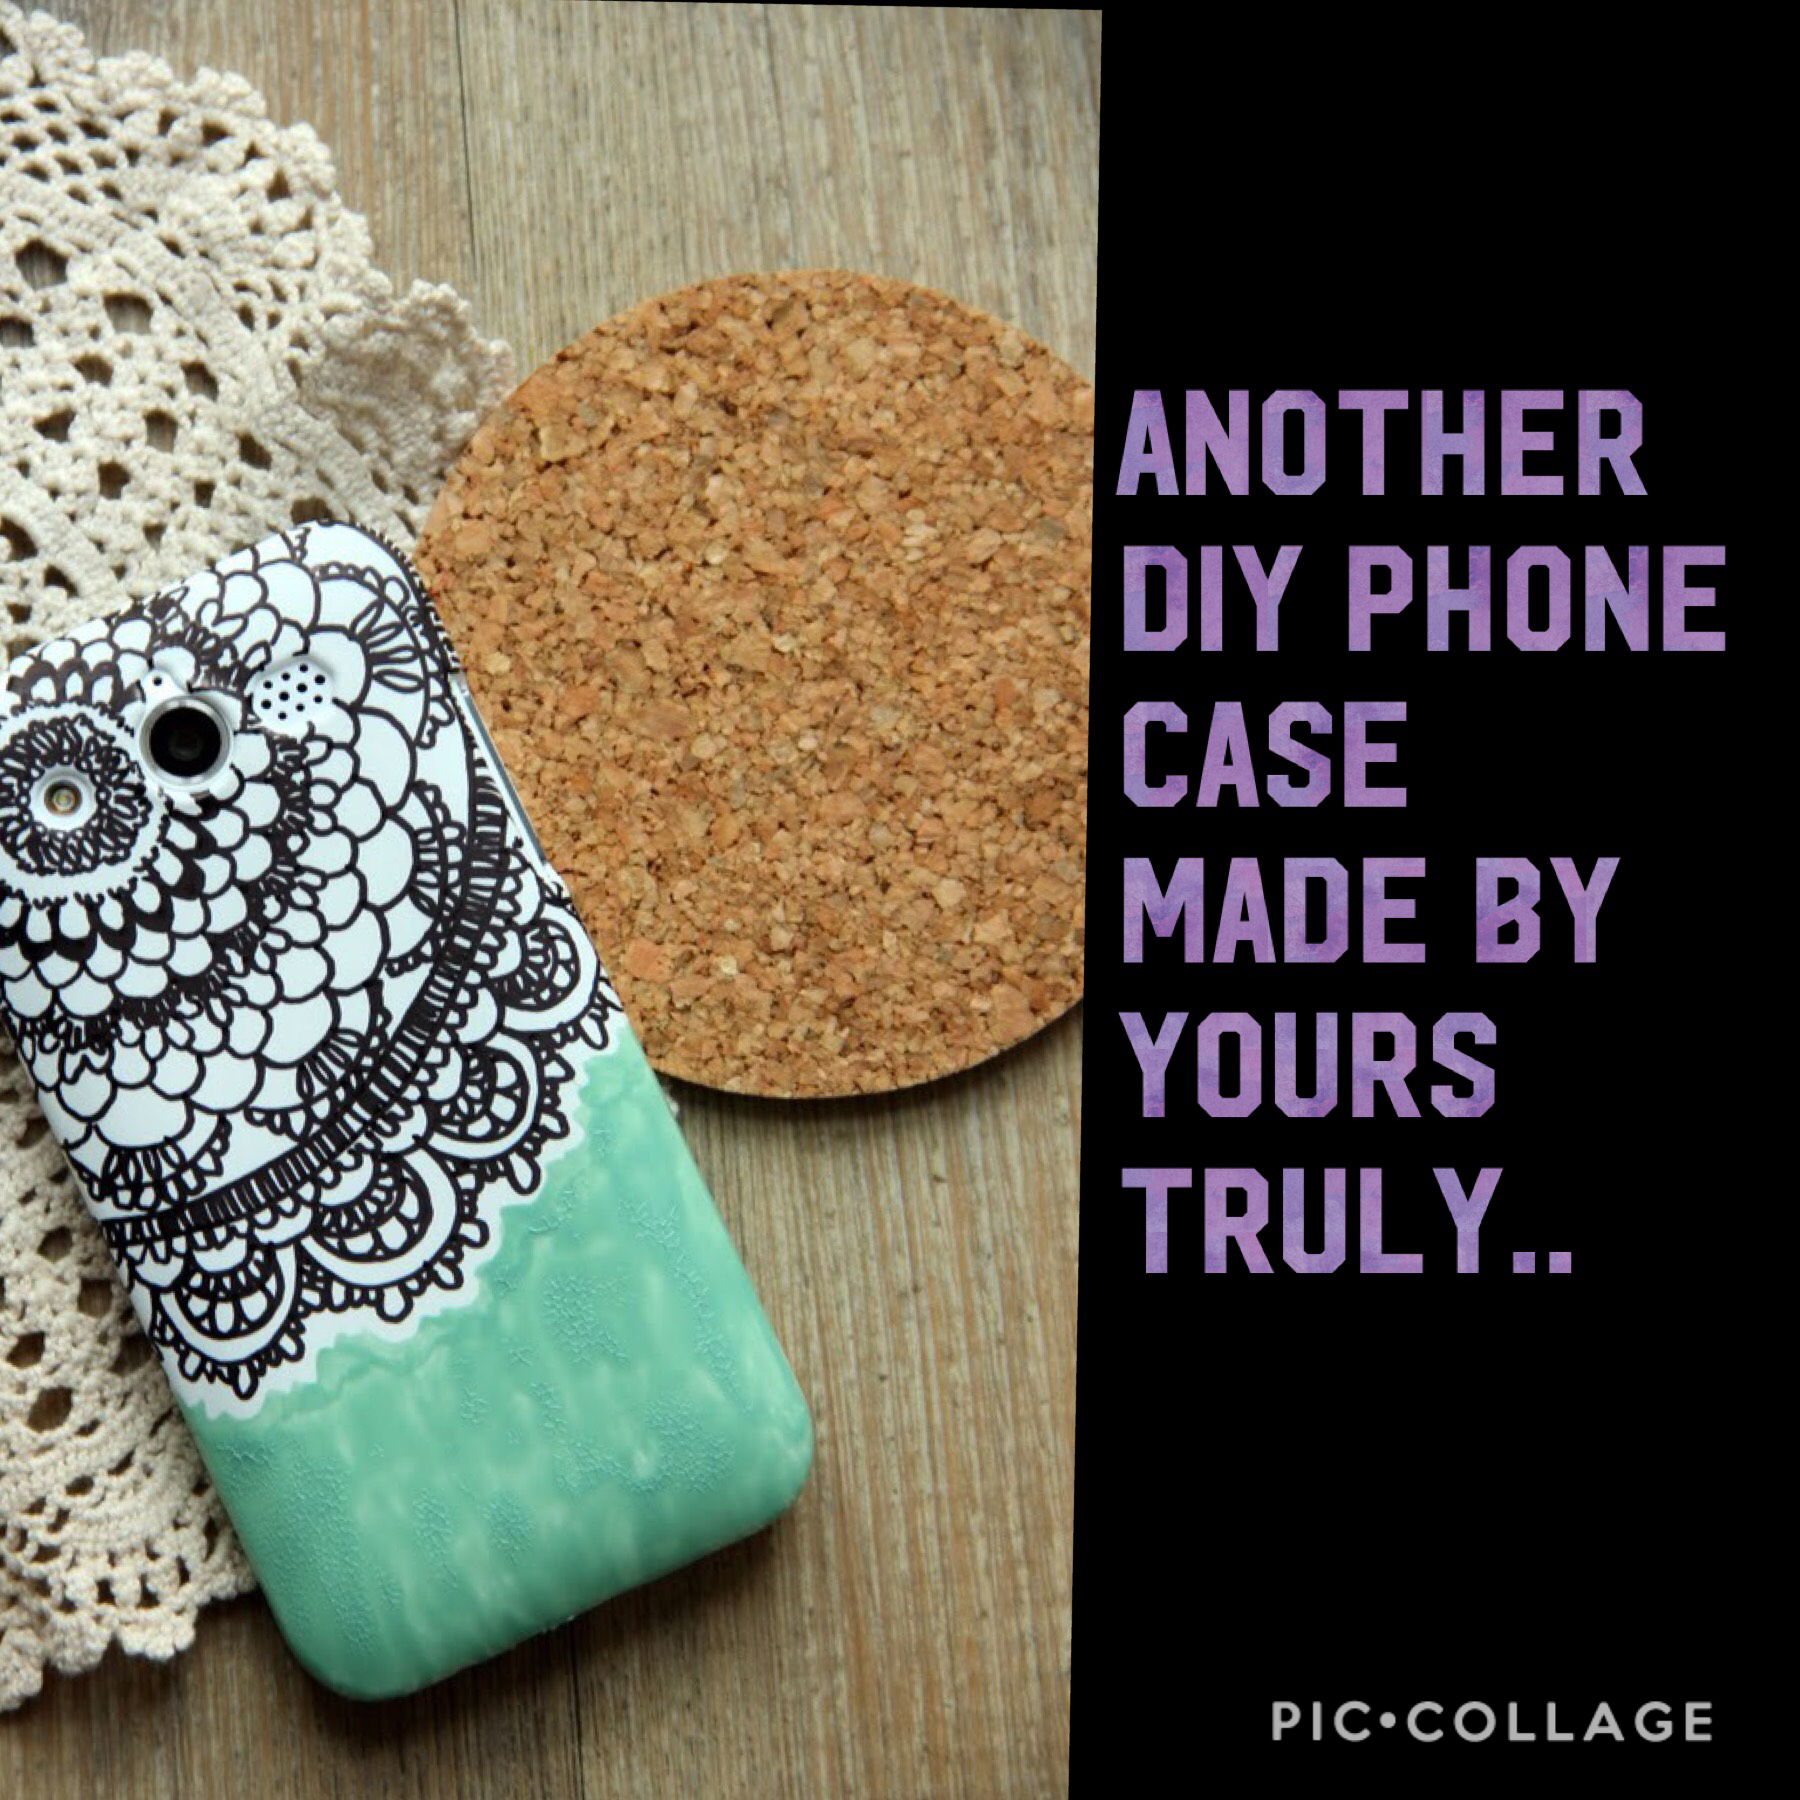 DIY phone made by yours.